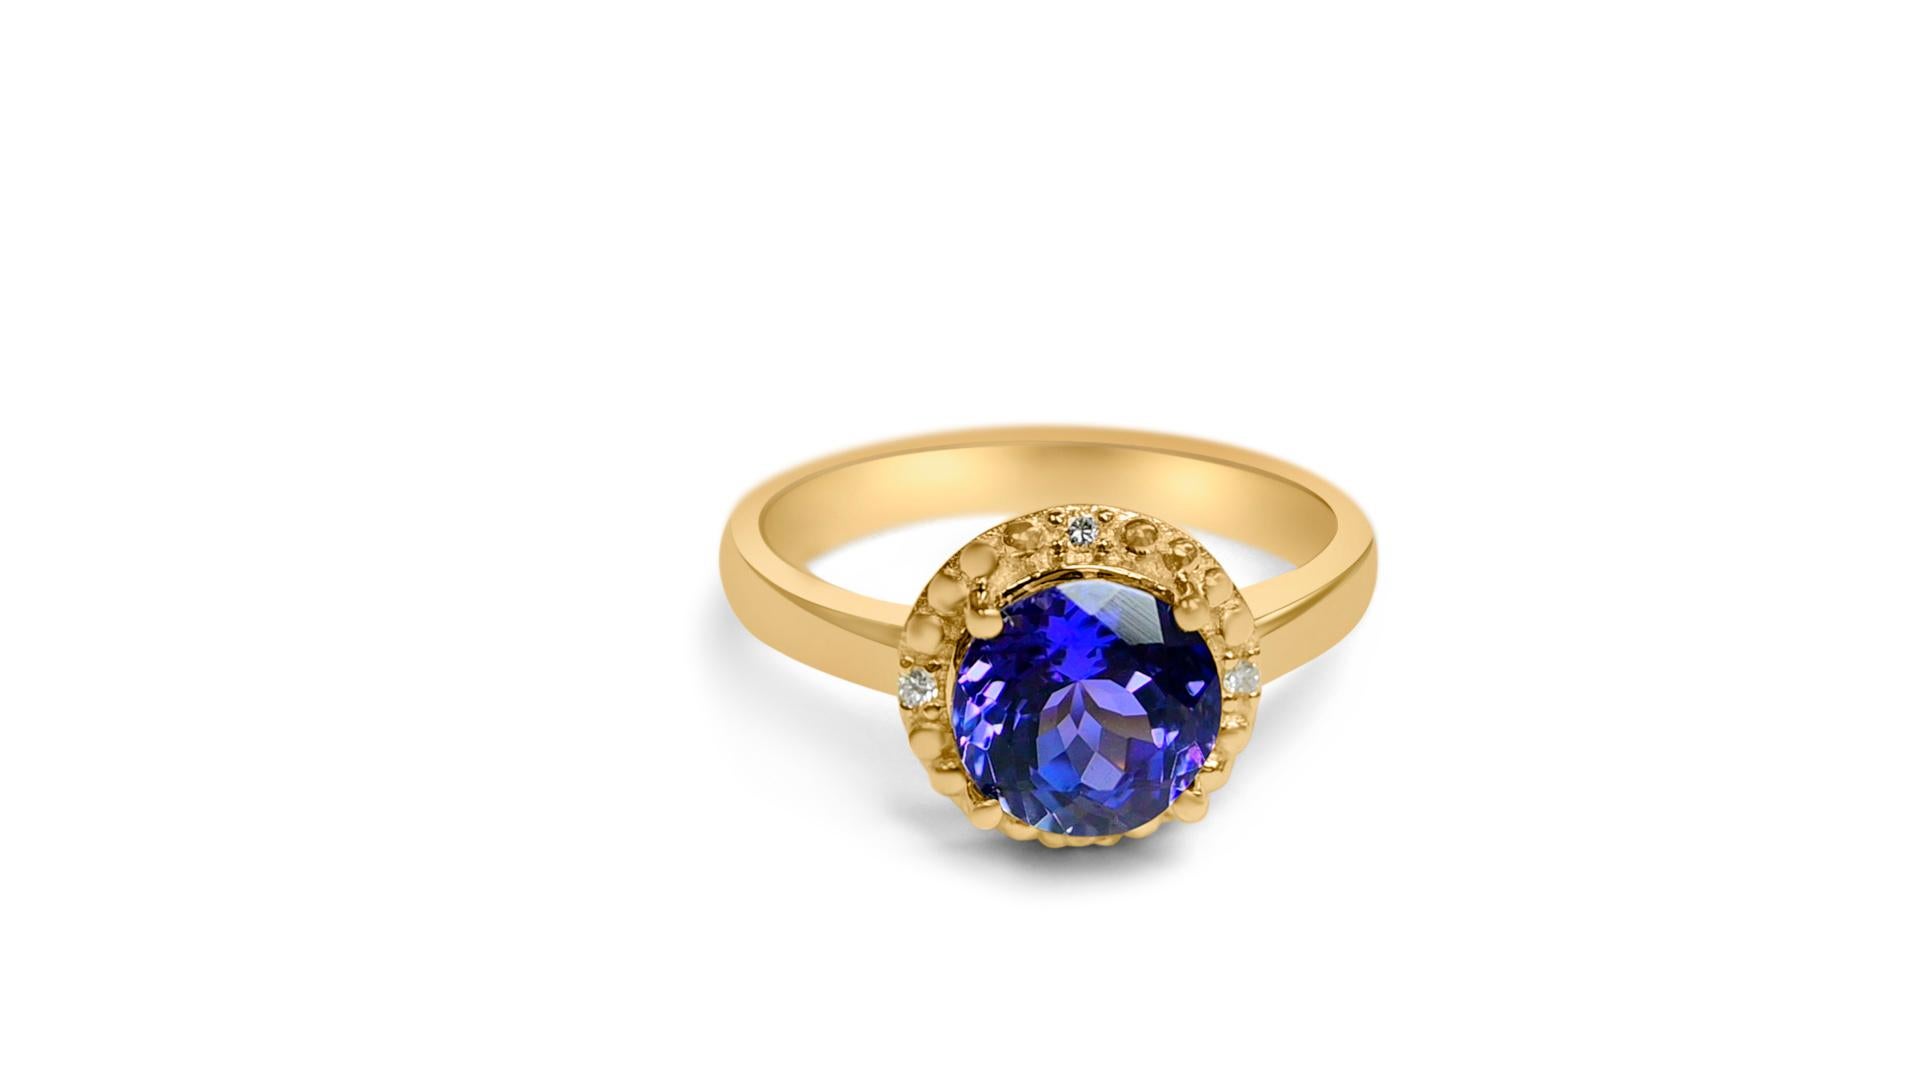 Art déco 2.24 Ctw Natural Tanzanite Solitaire Ring 14K Gold Bridal Ring For Women Jewelry en vente